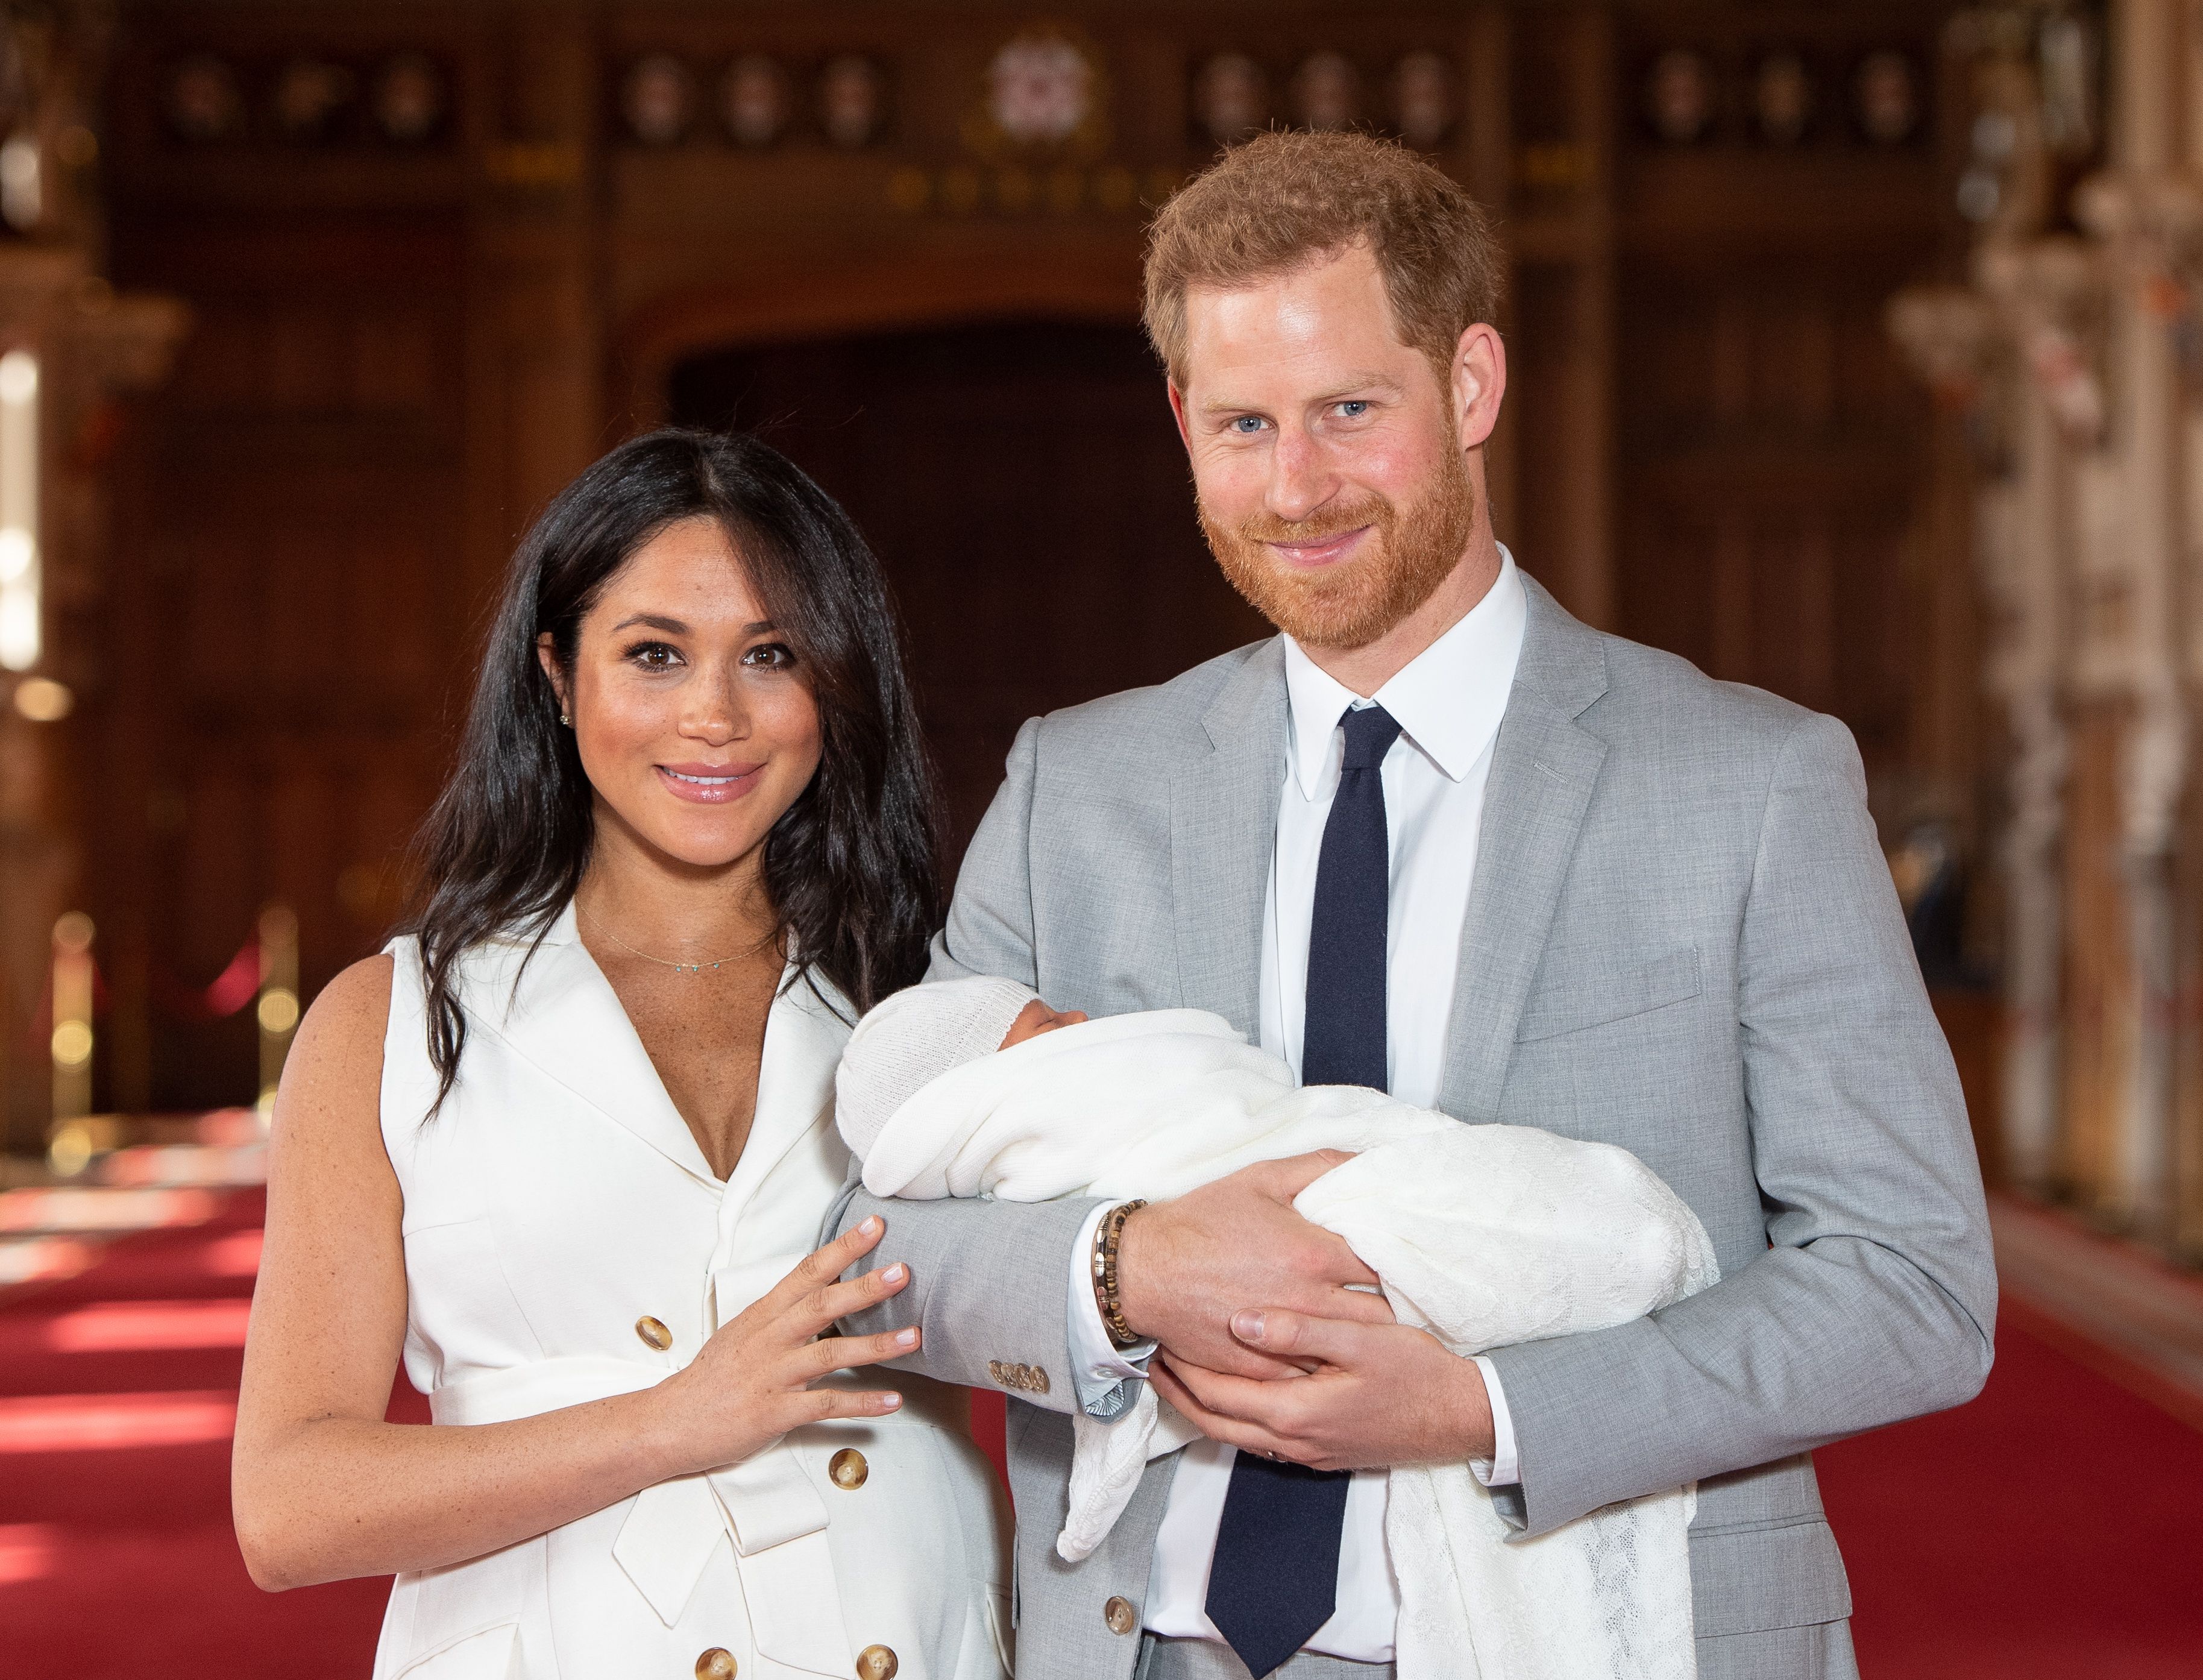 Prince Harry and Meghan Markle pose with their newborn son Archie Harrison Mountbatten-Windsor in St George's Hall at Windsor Castle on May 8, 2019 in Windsor, England. | Source: Getty Images